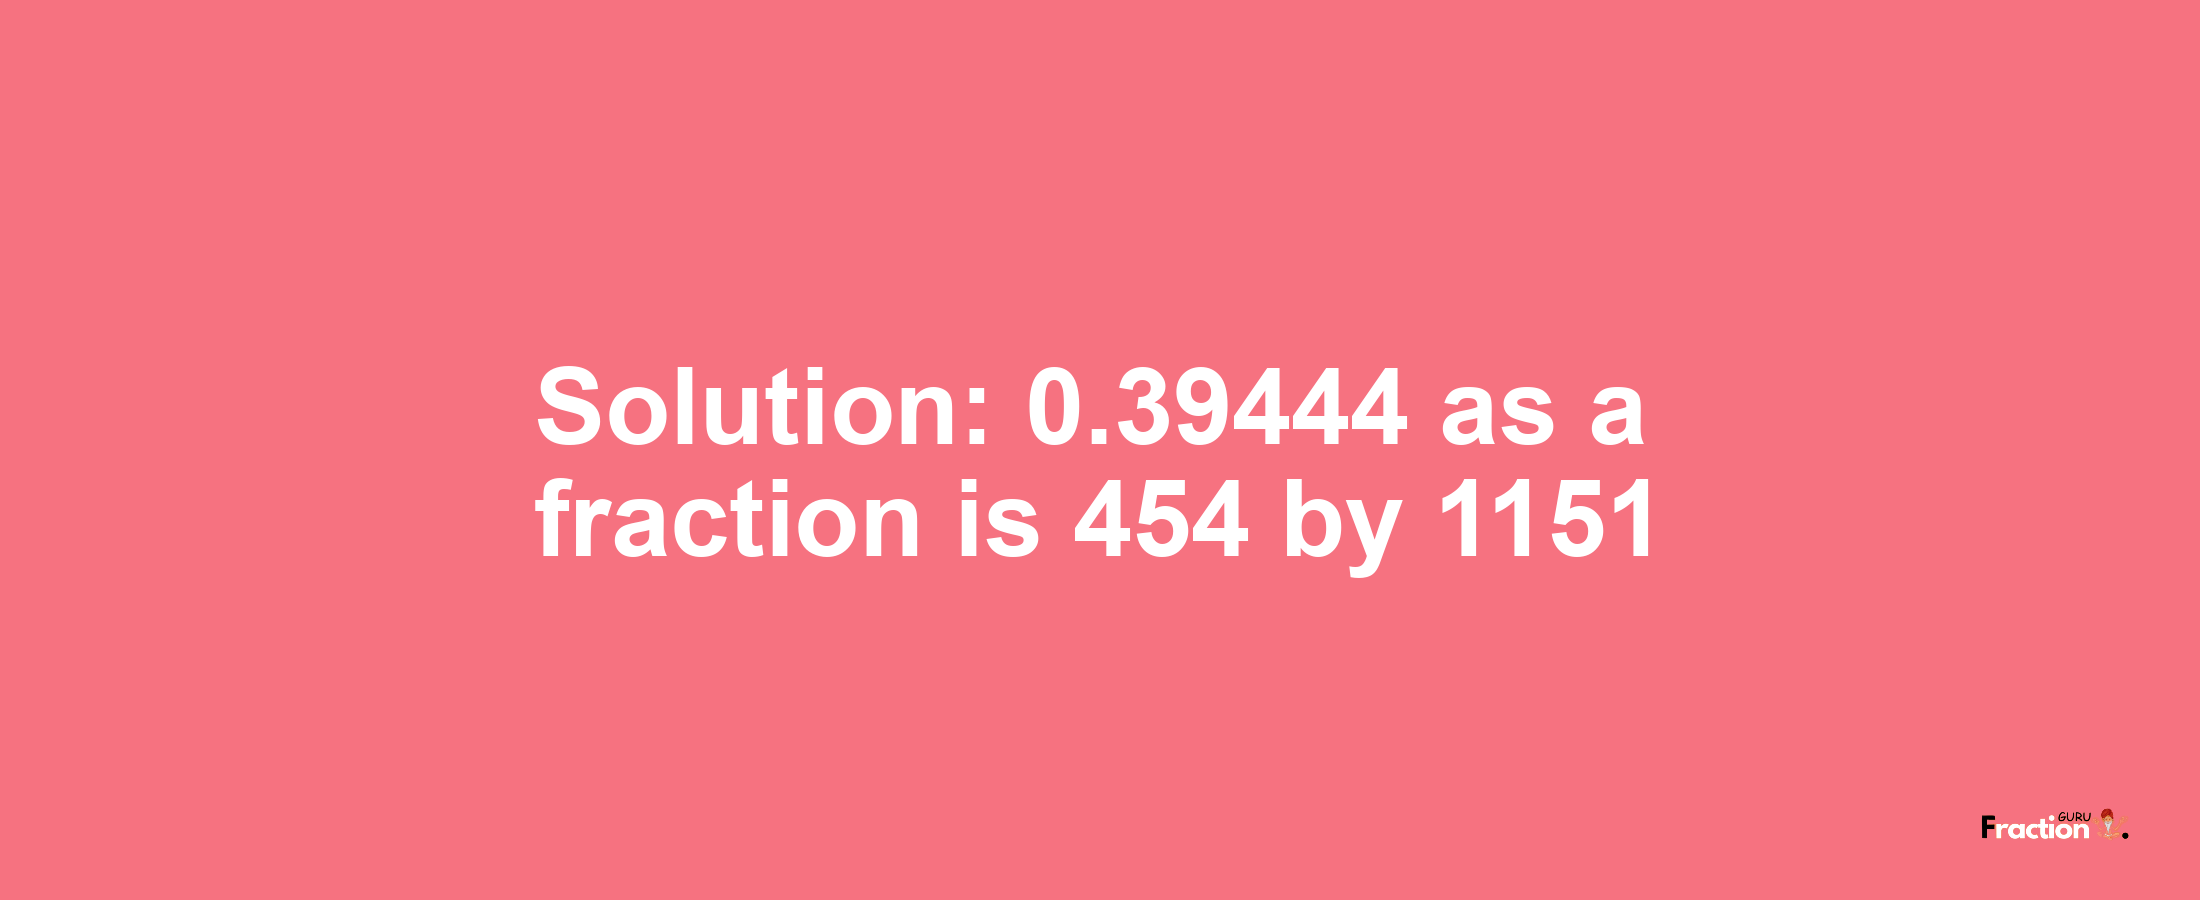 Solution:0.39444 as a fraction is 454/1151